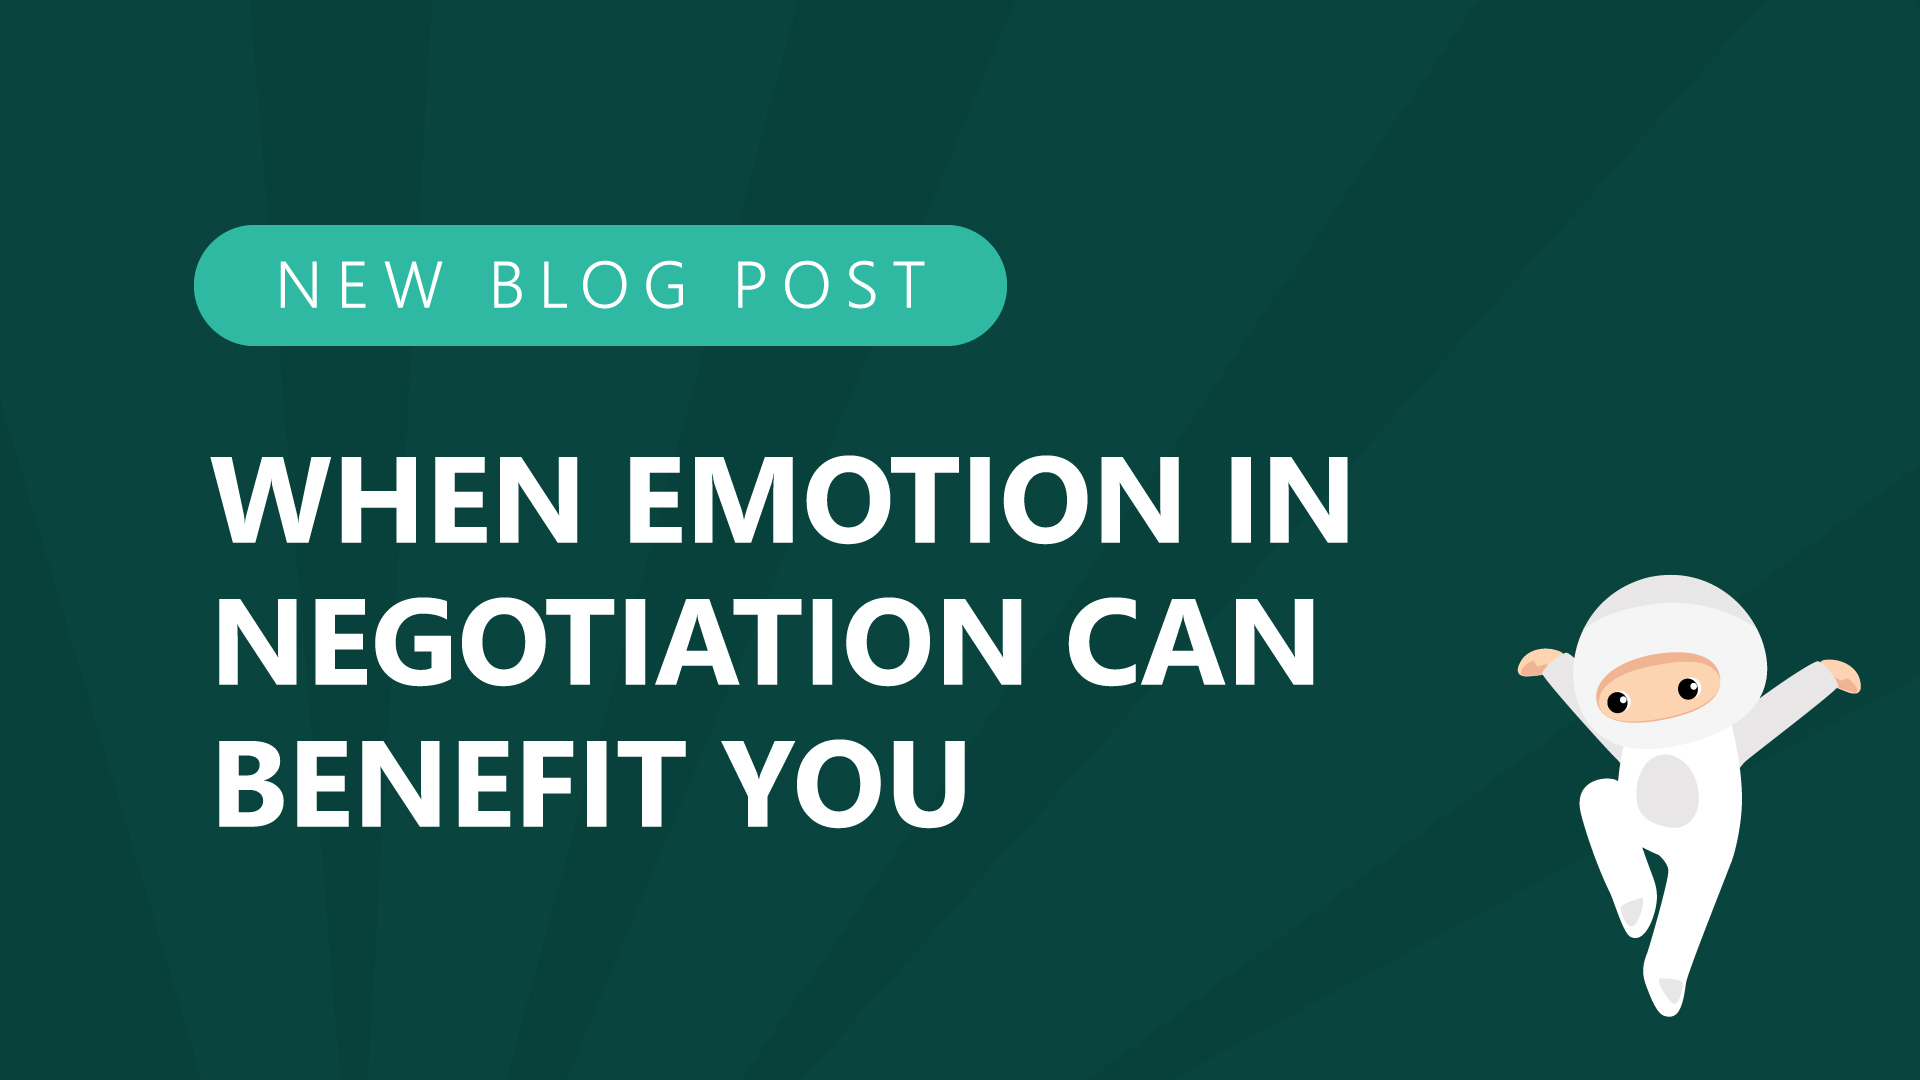 58-When-Emotion-in-Negotiation-Can-Benefit-You.jpg